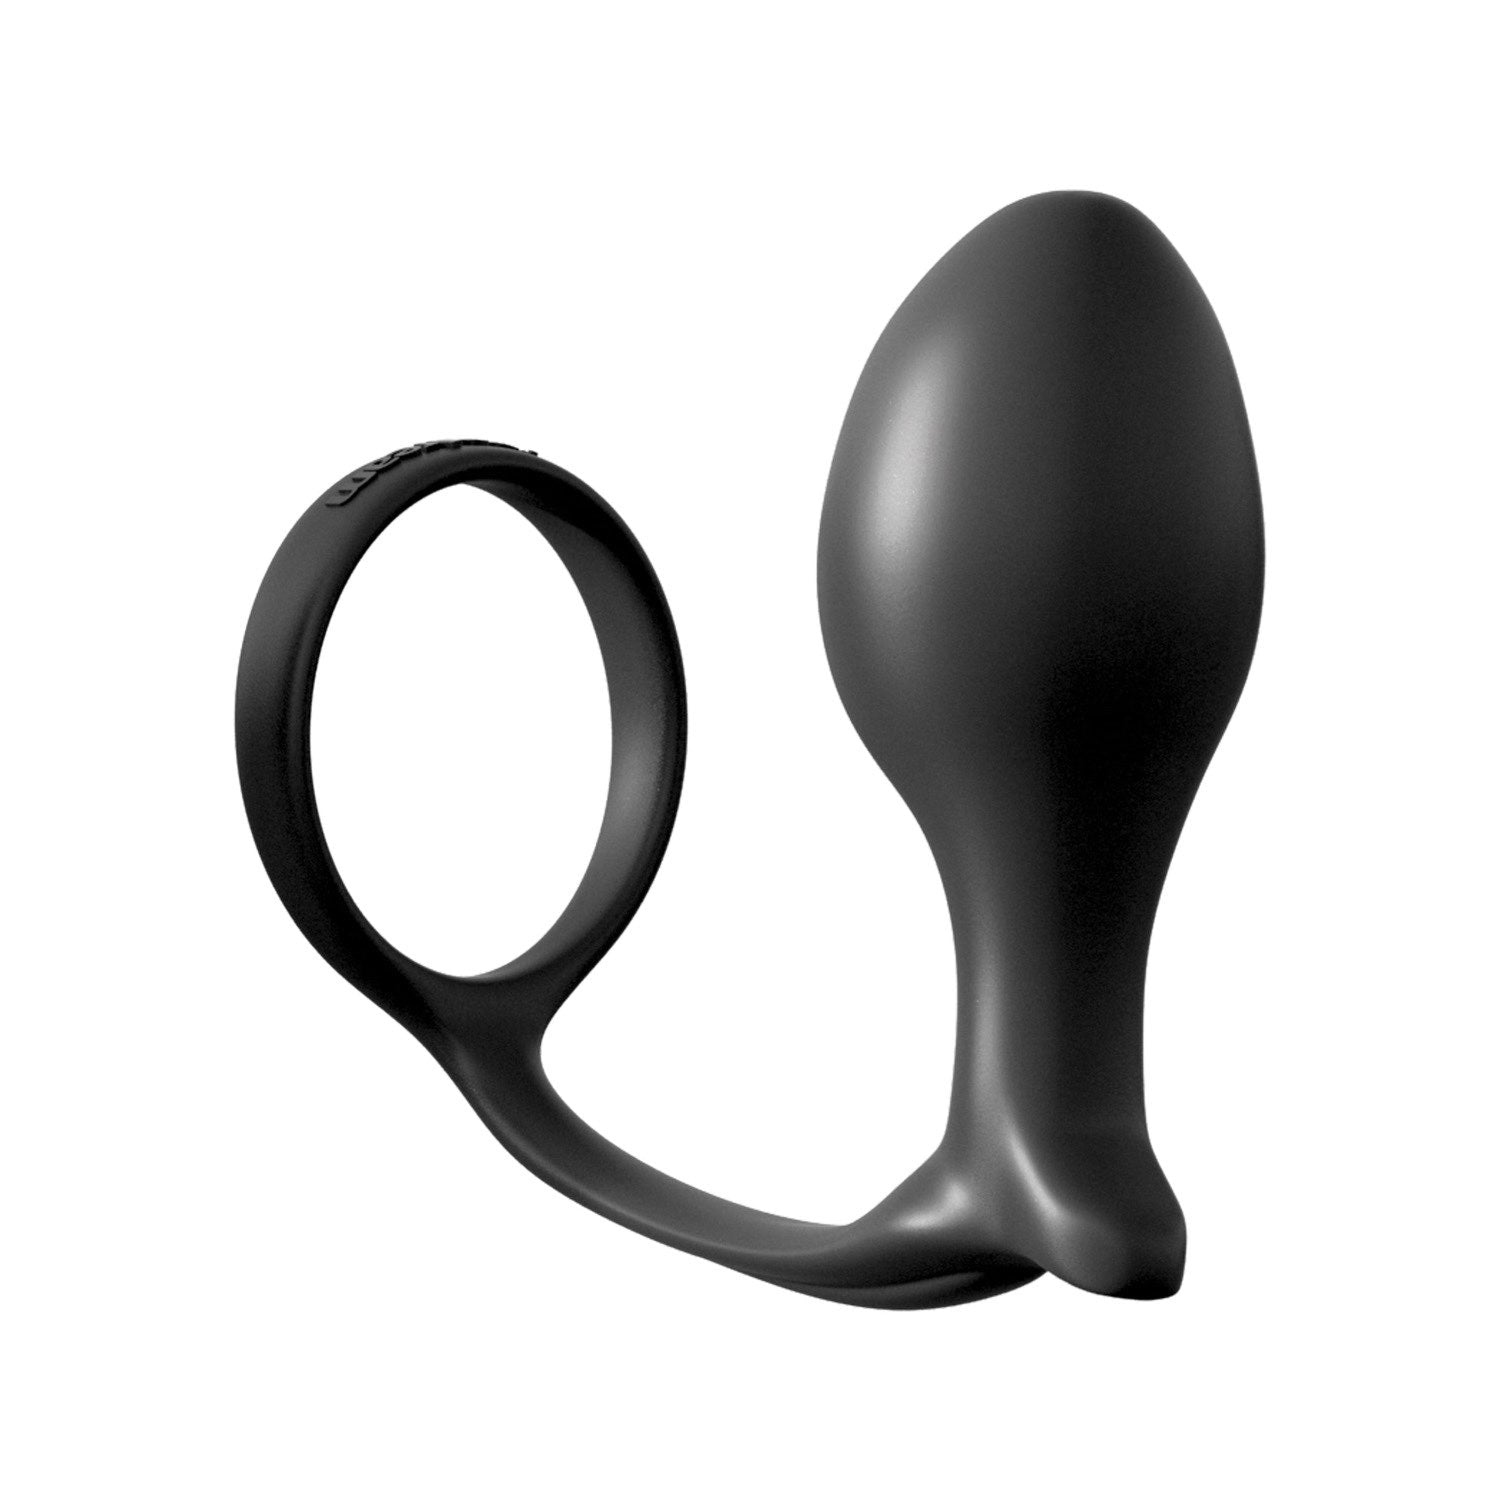 Anal Fantasy Collection Ass-Gasm Cock Ring Advanced Plug - Black Cock Ring with Anal Plug by Pipedream